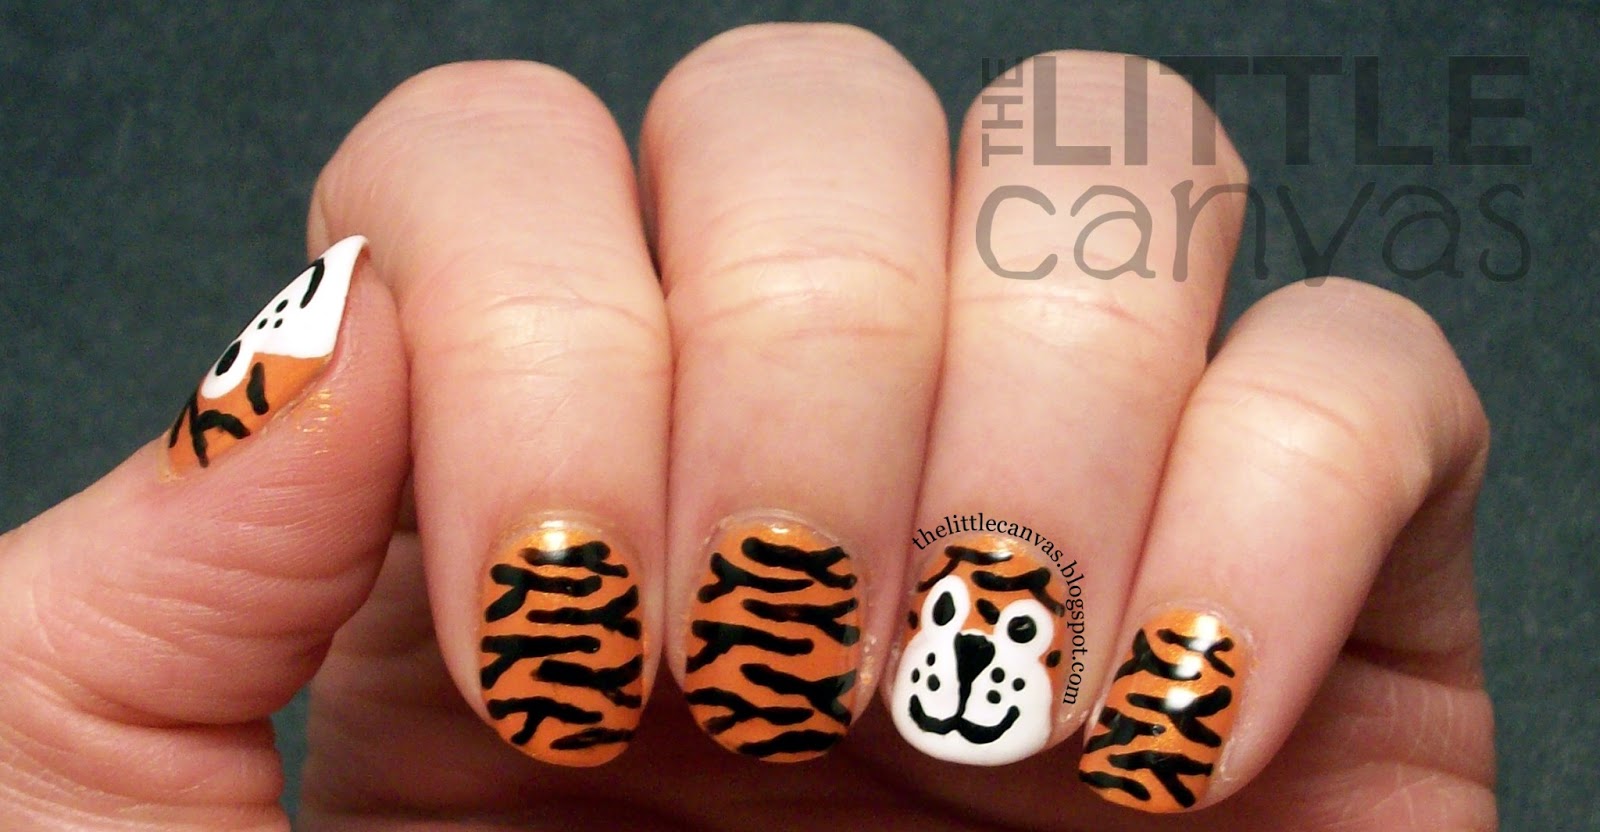 1. Tiger Nail Art Designs: 10 Ideas for Your Next Manicure - wide 6